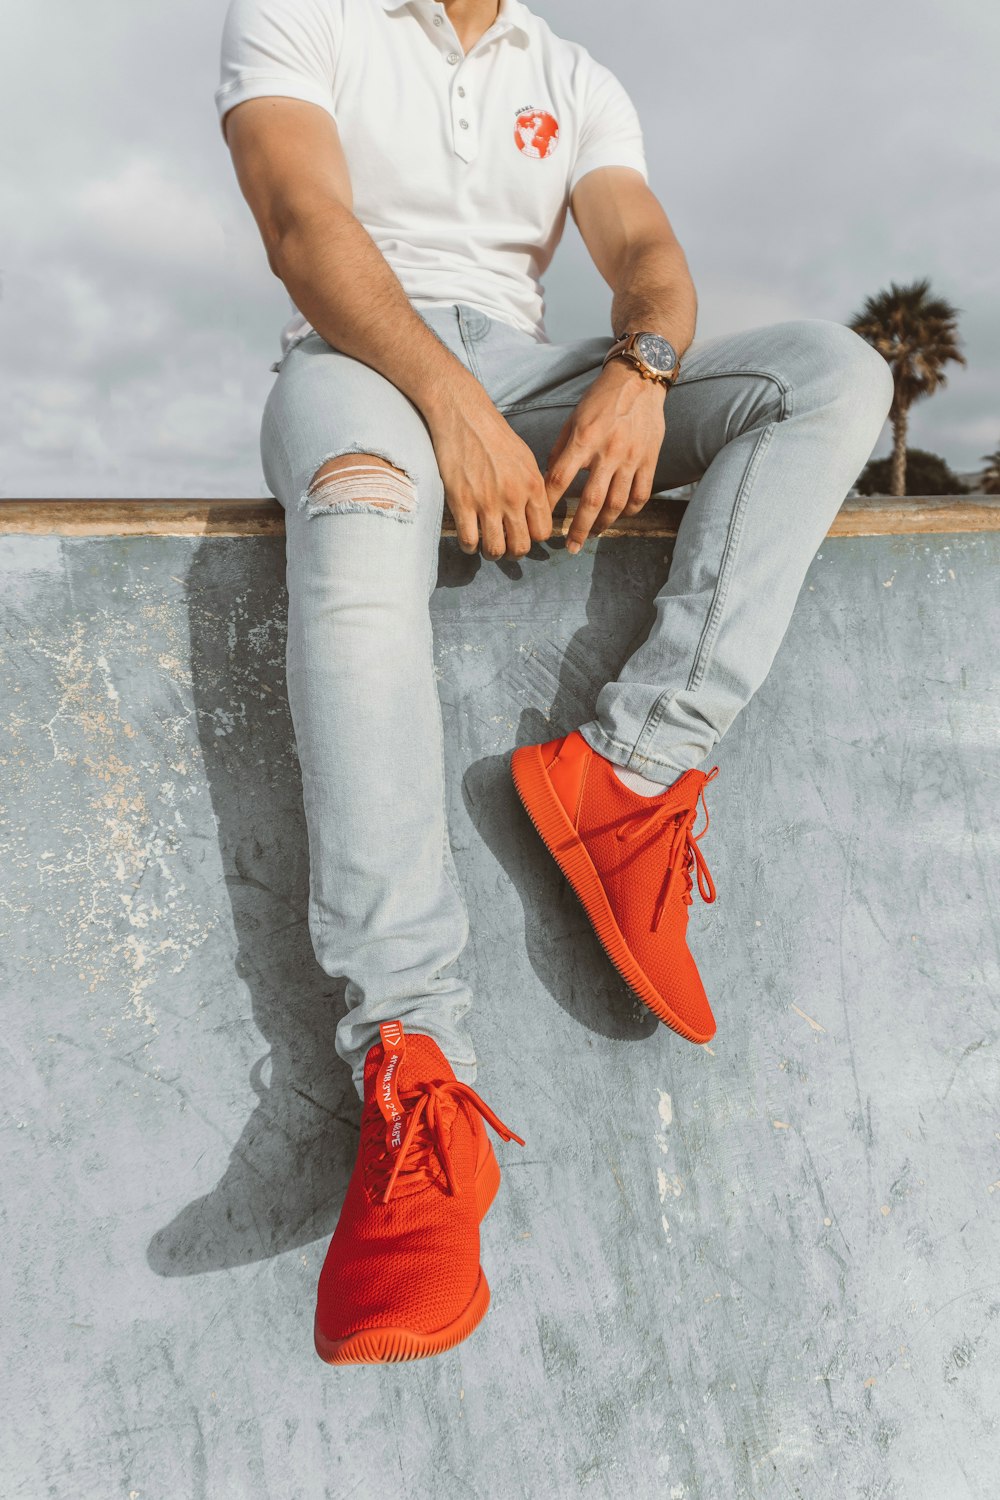 Man wearing white polo shirt and pair of red sneakers photo – Free Gents  clothing Image on Unsplash